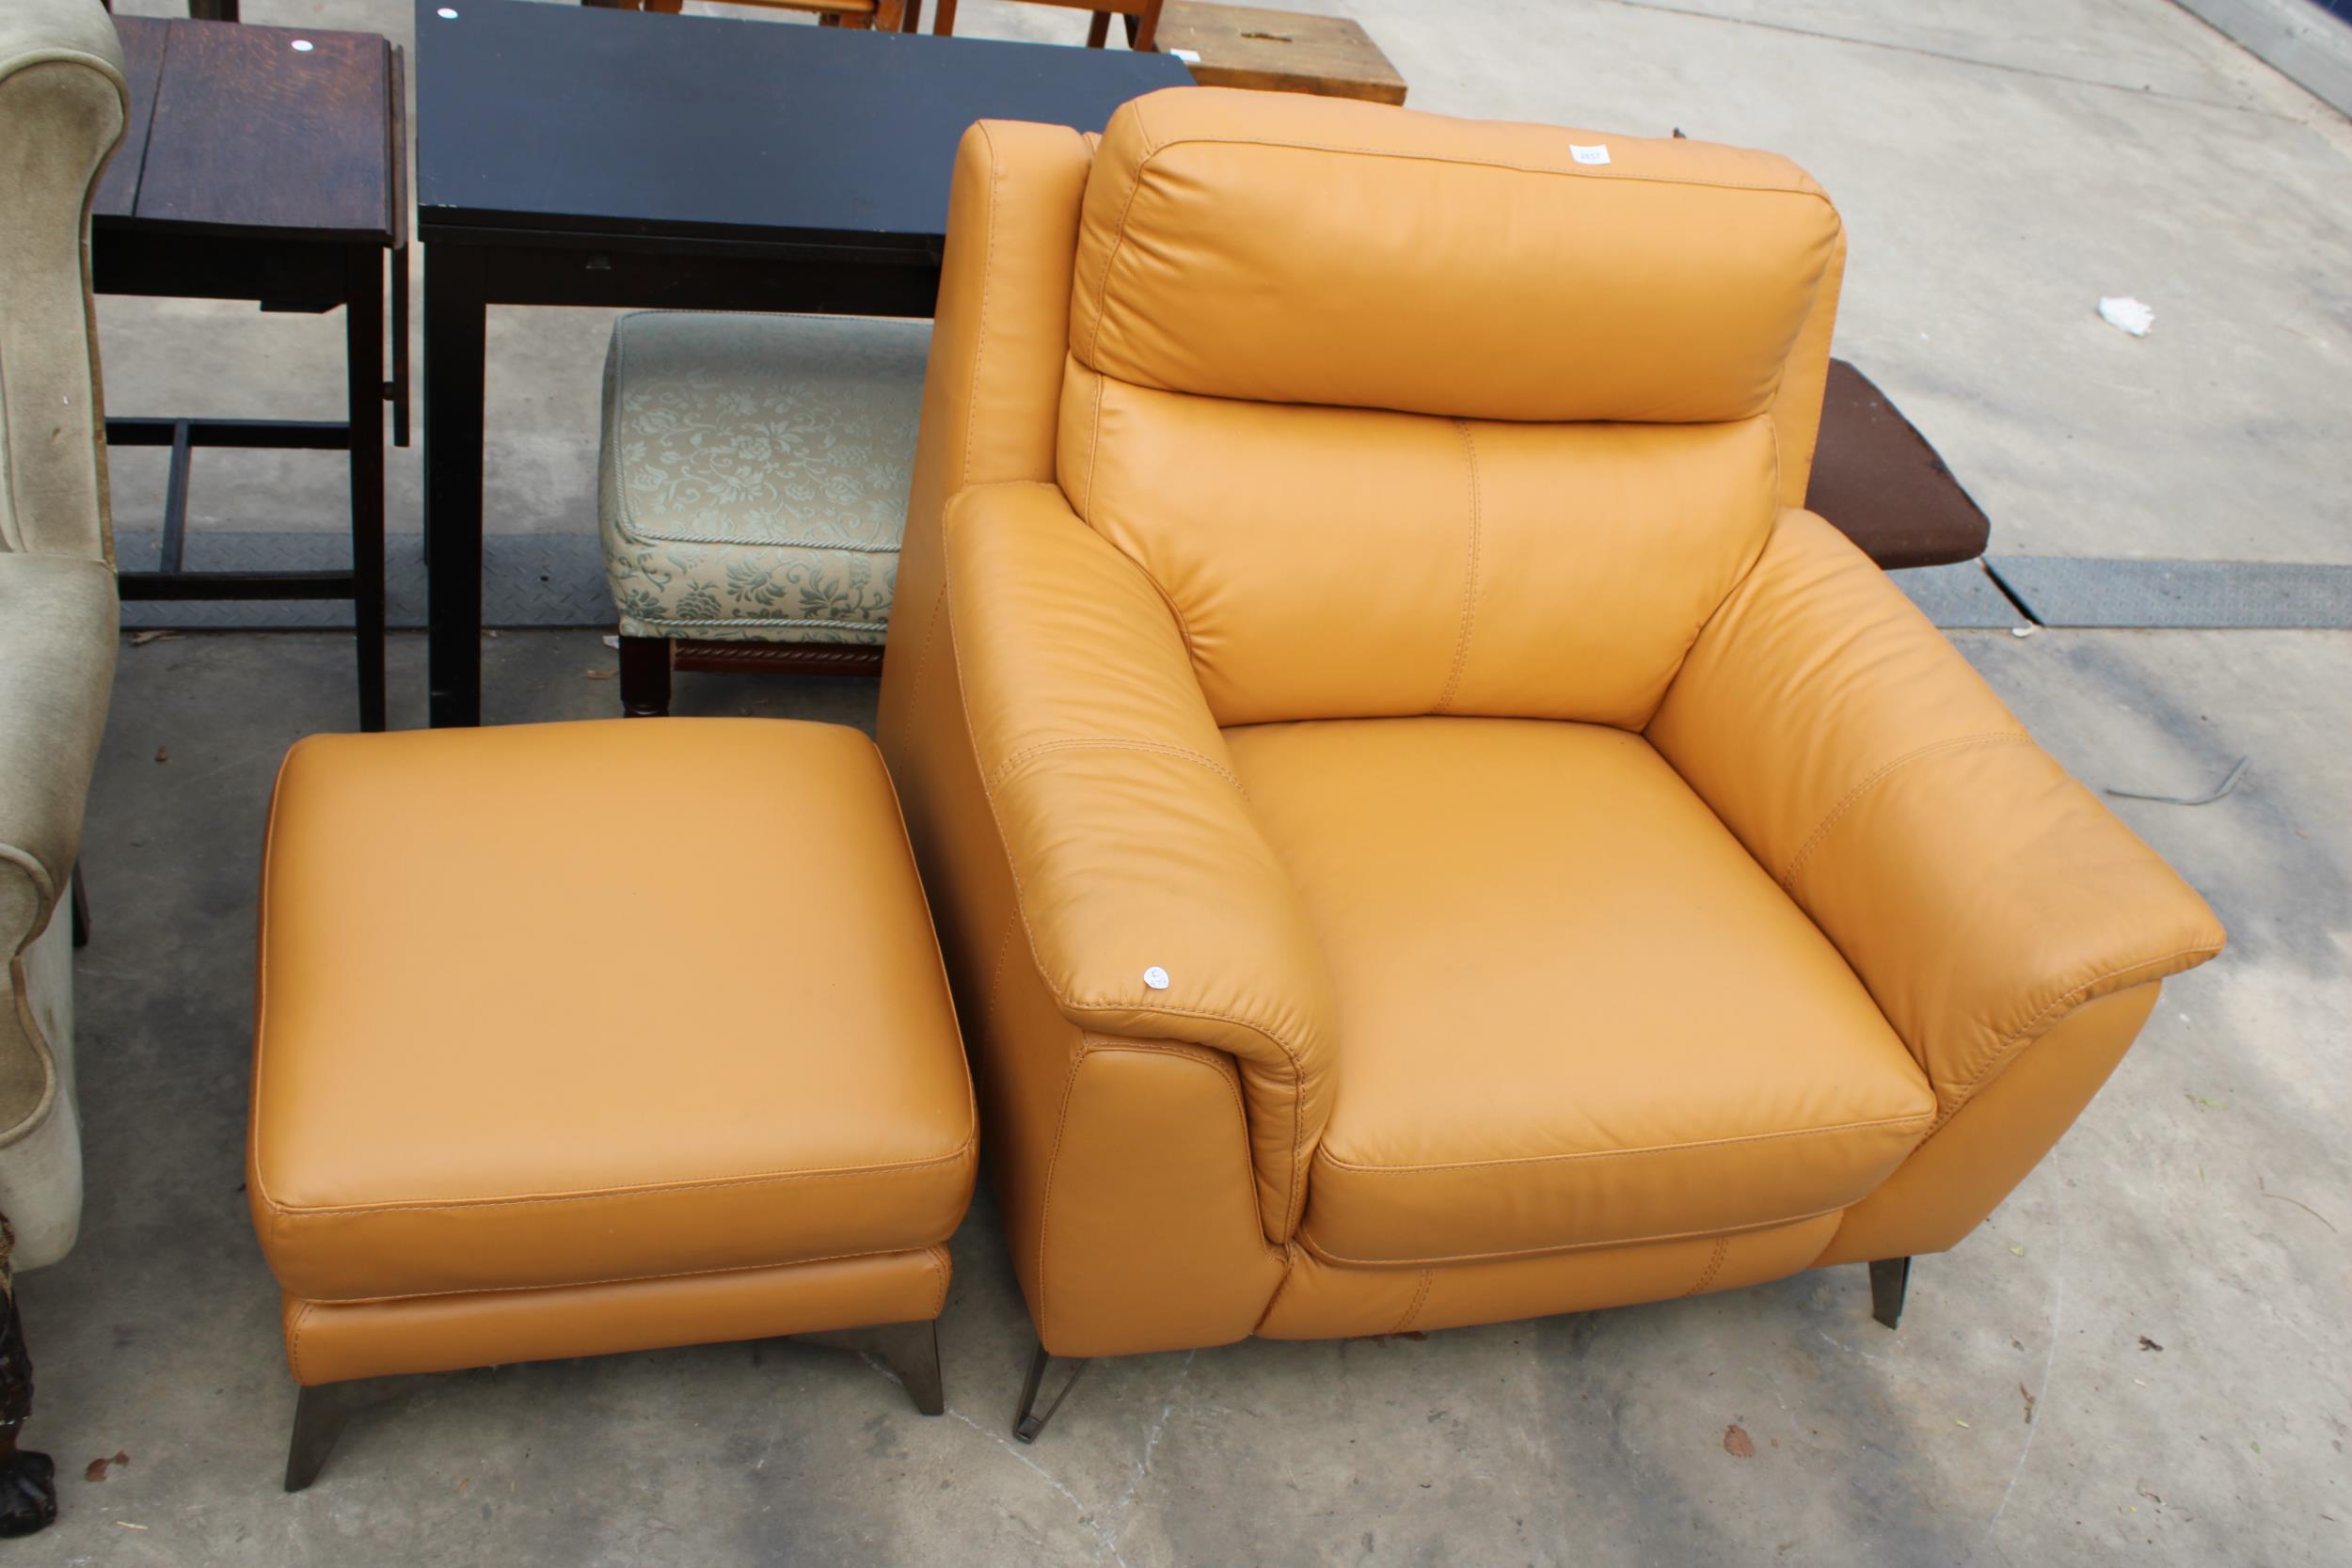 A CARAMEL LEATHER EASY CHAIR AND FOOTSTOOL ON POLISHED CHROME LEGS